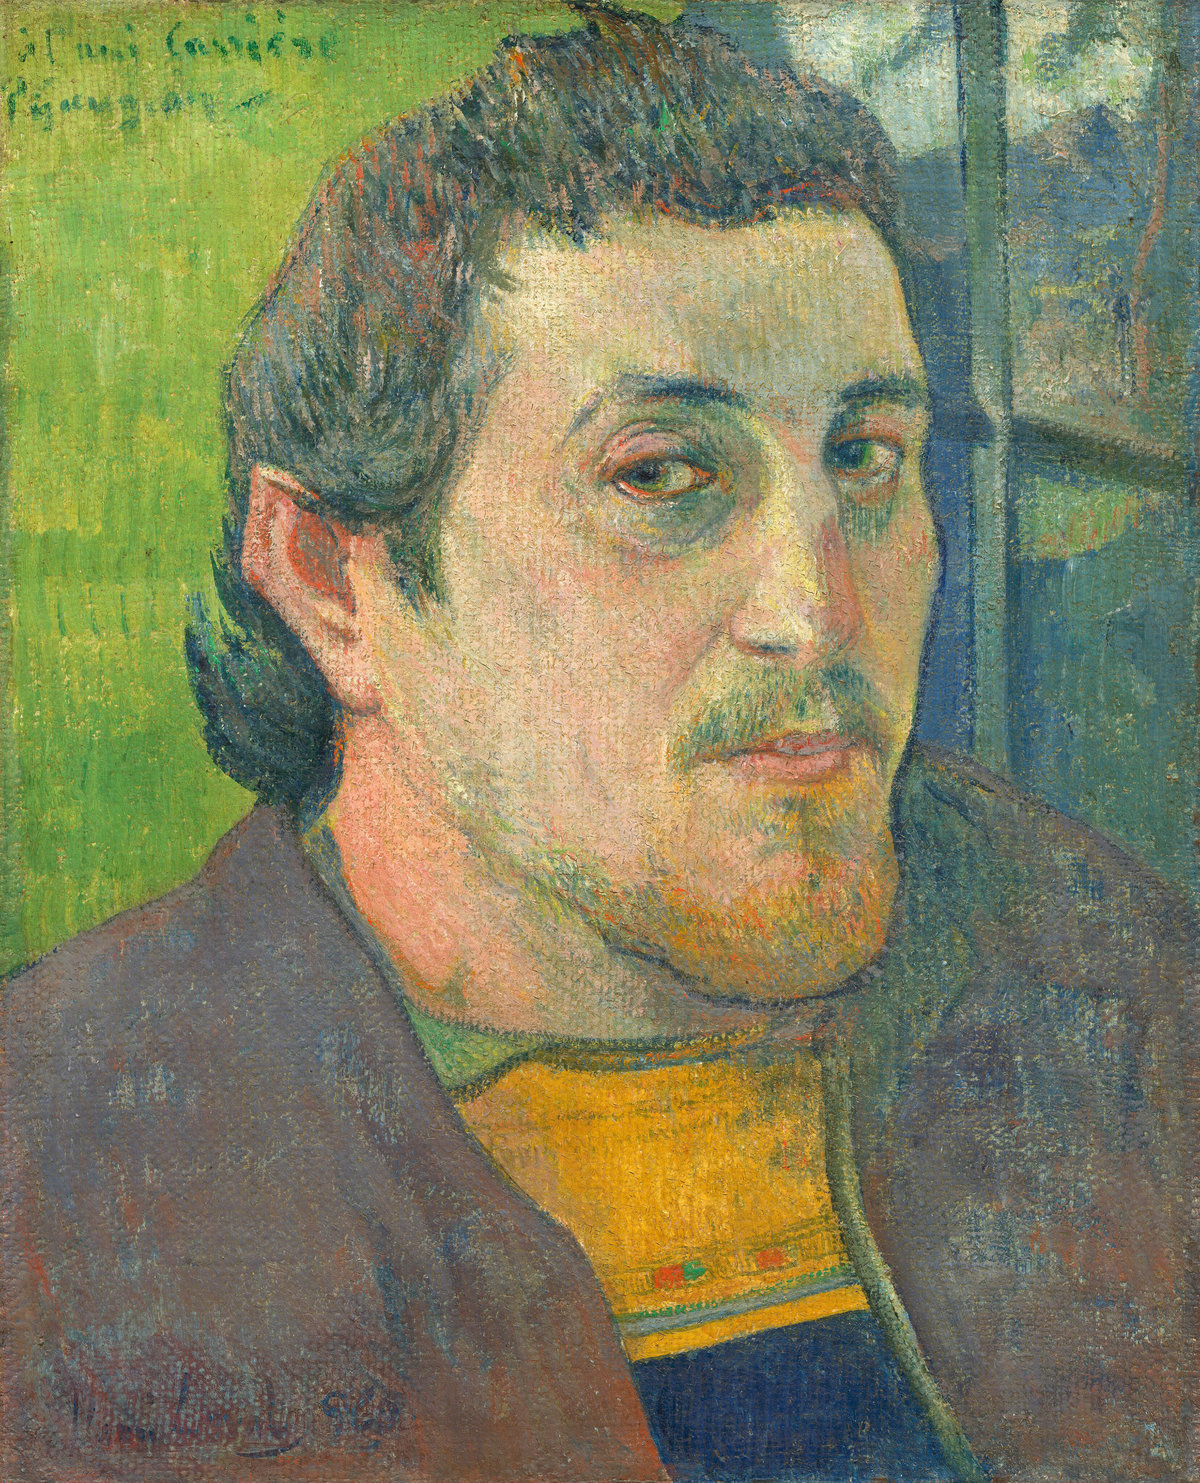 Letters written and signed by Gauguin and Cezanne are part of